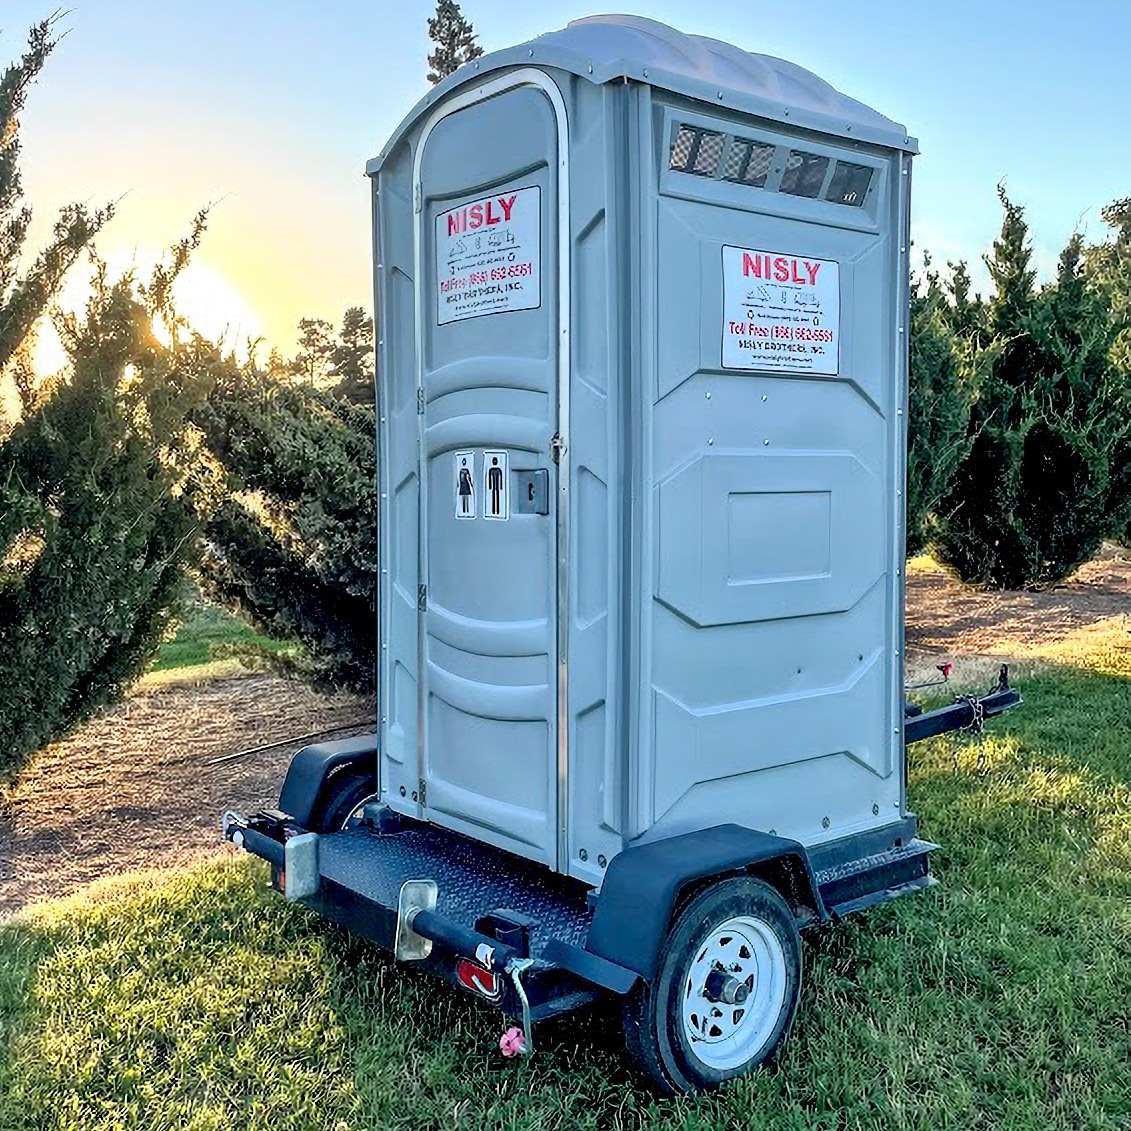 How to clean a porta potty - a step-by-step guide | iProWeb